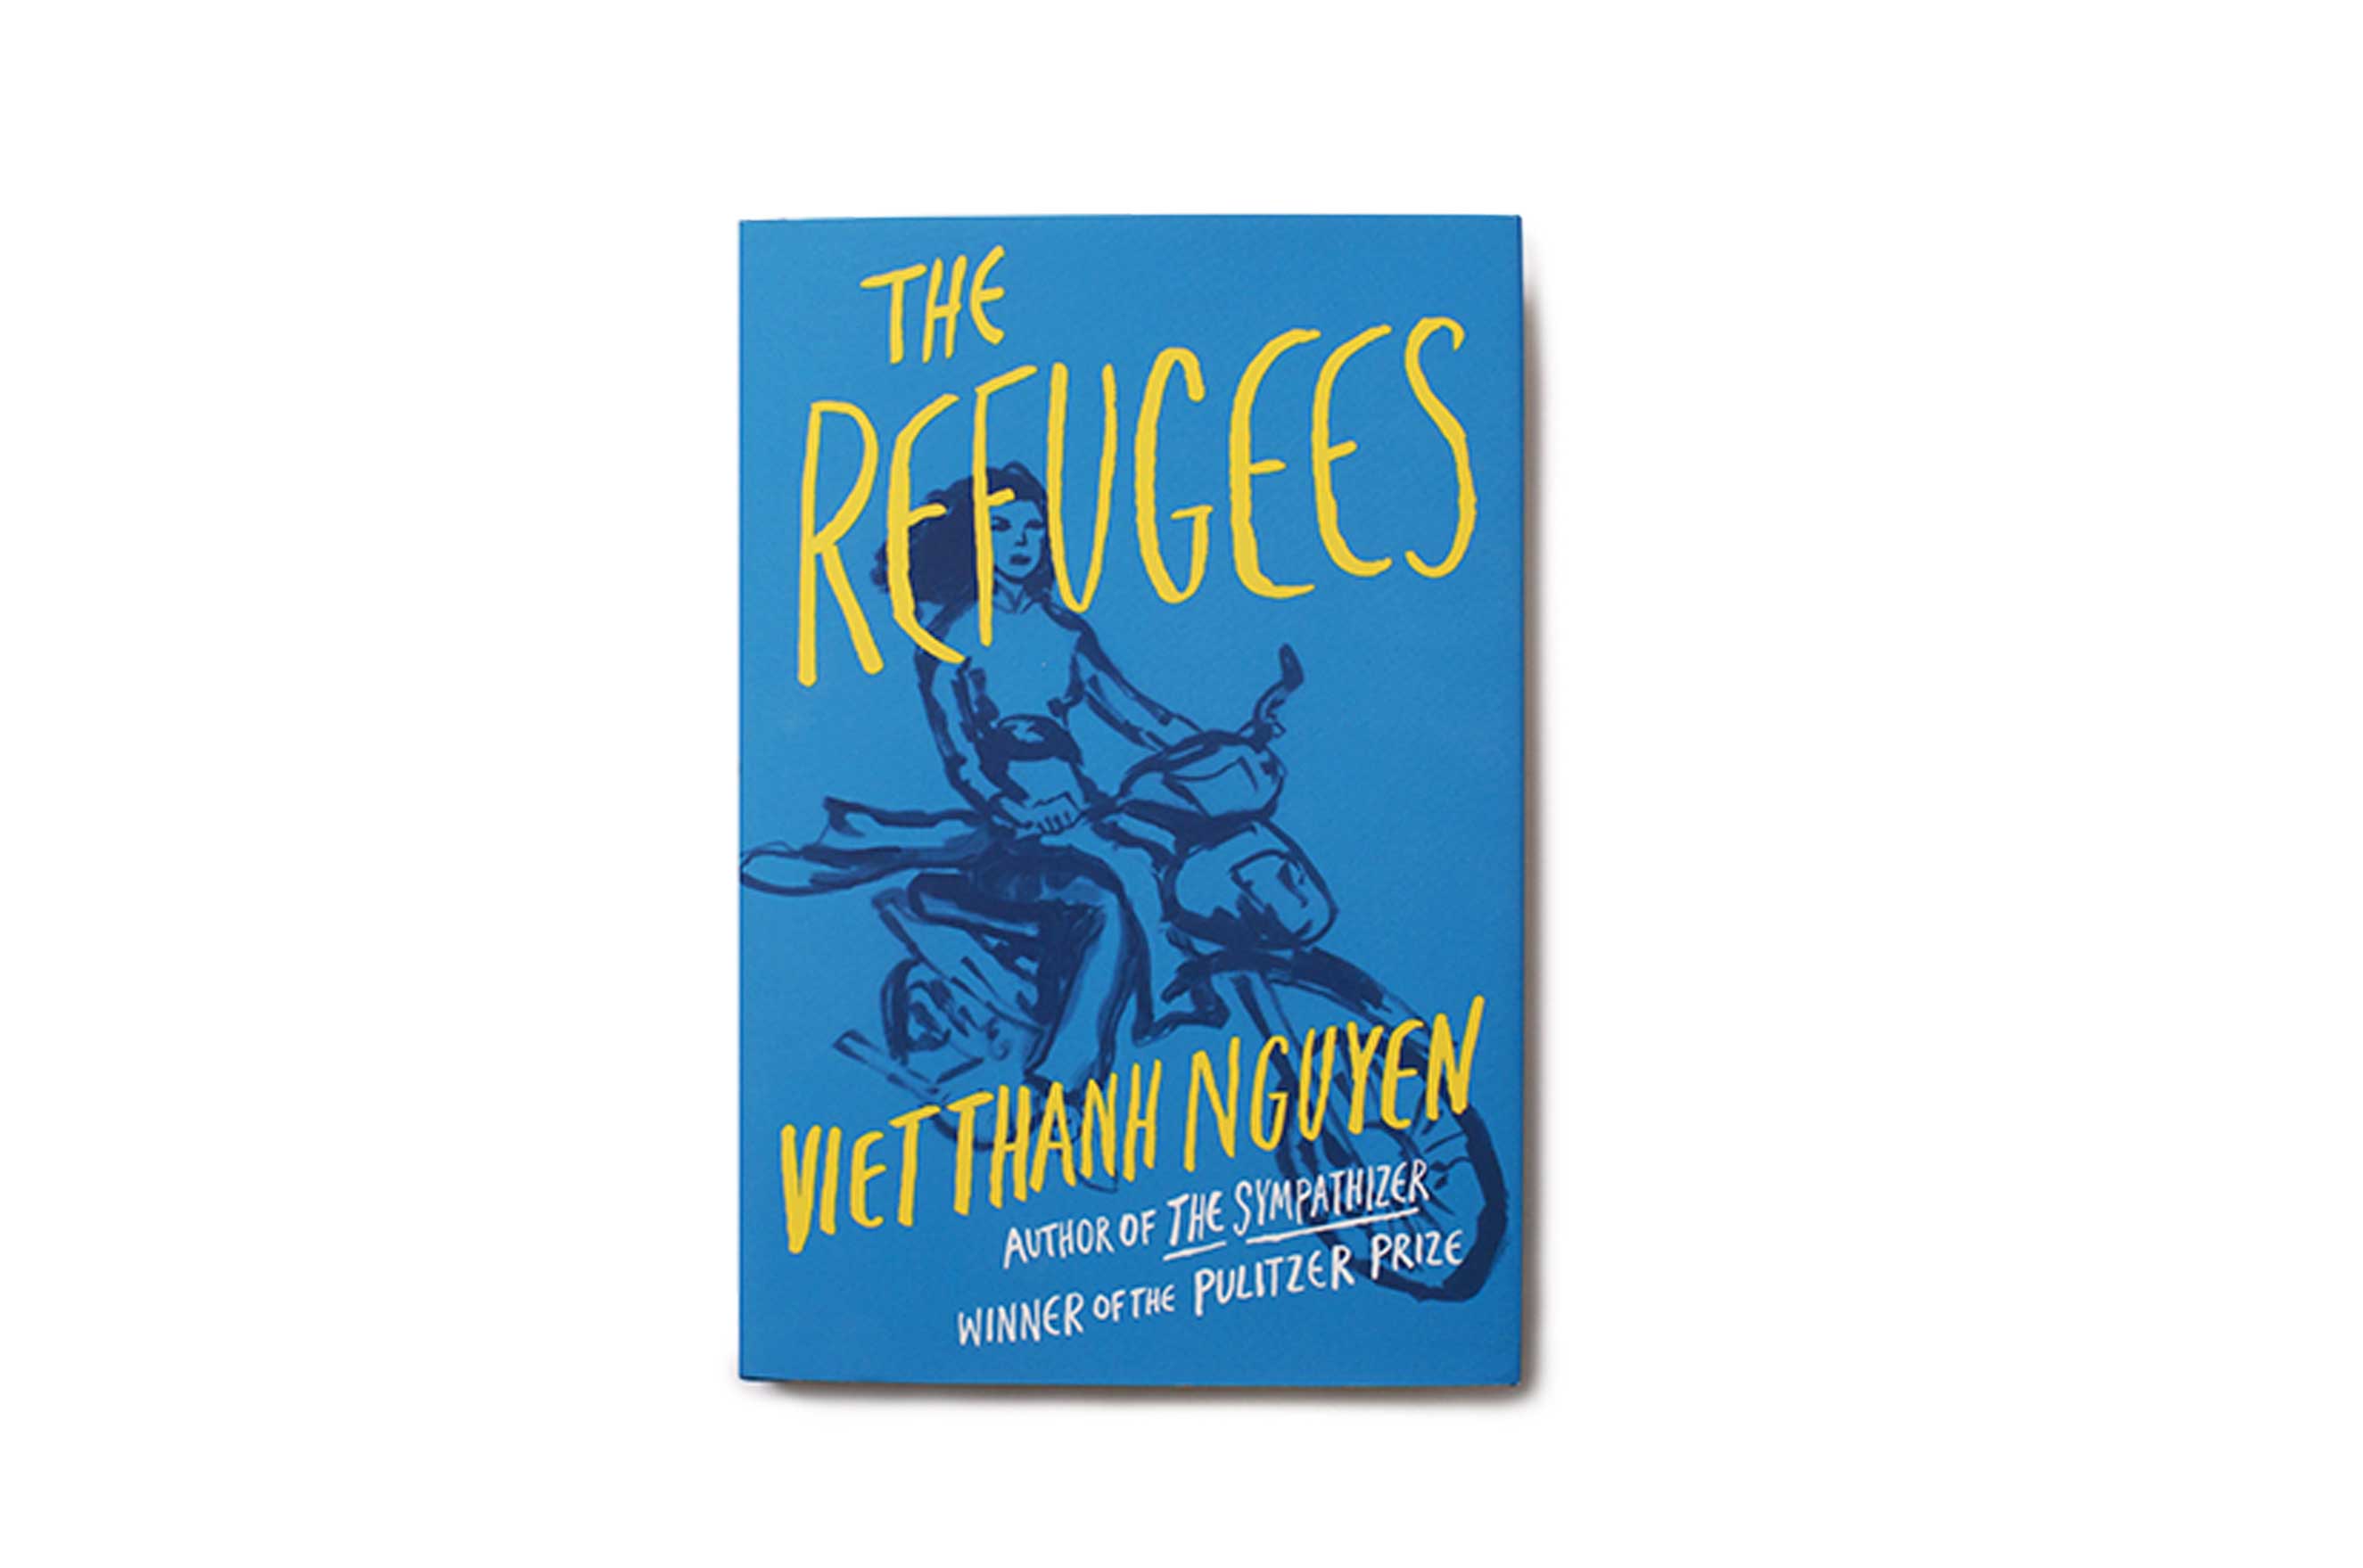 the-refugees-viet-thanh-nguyen